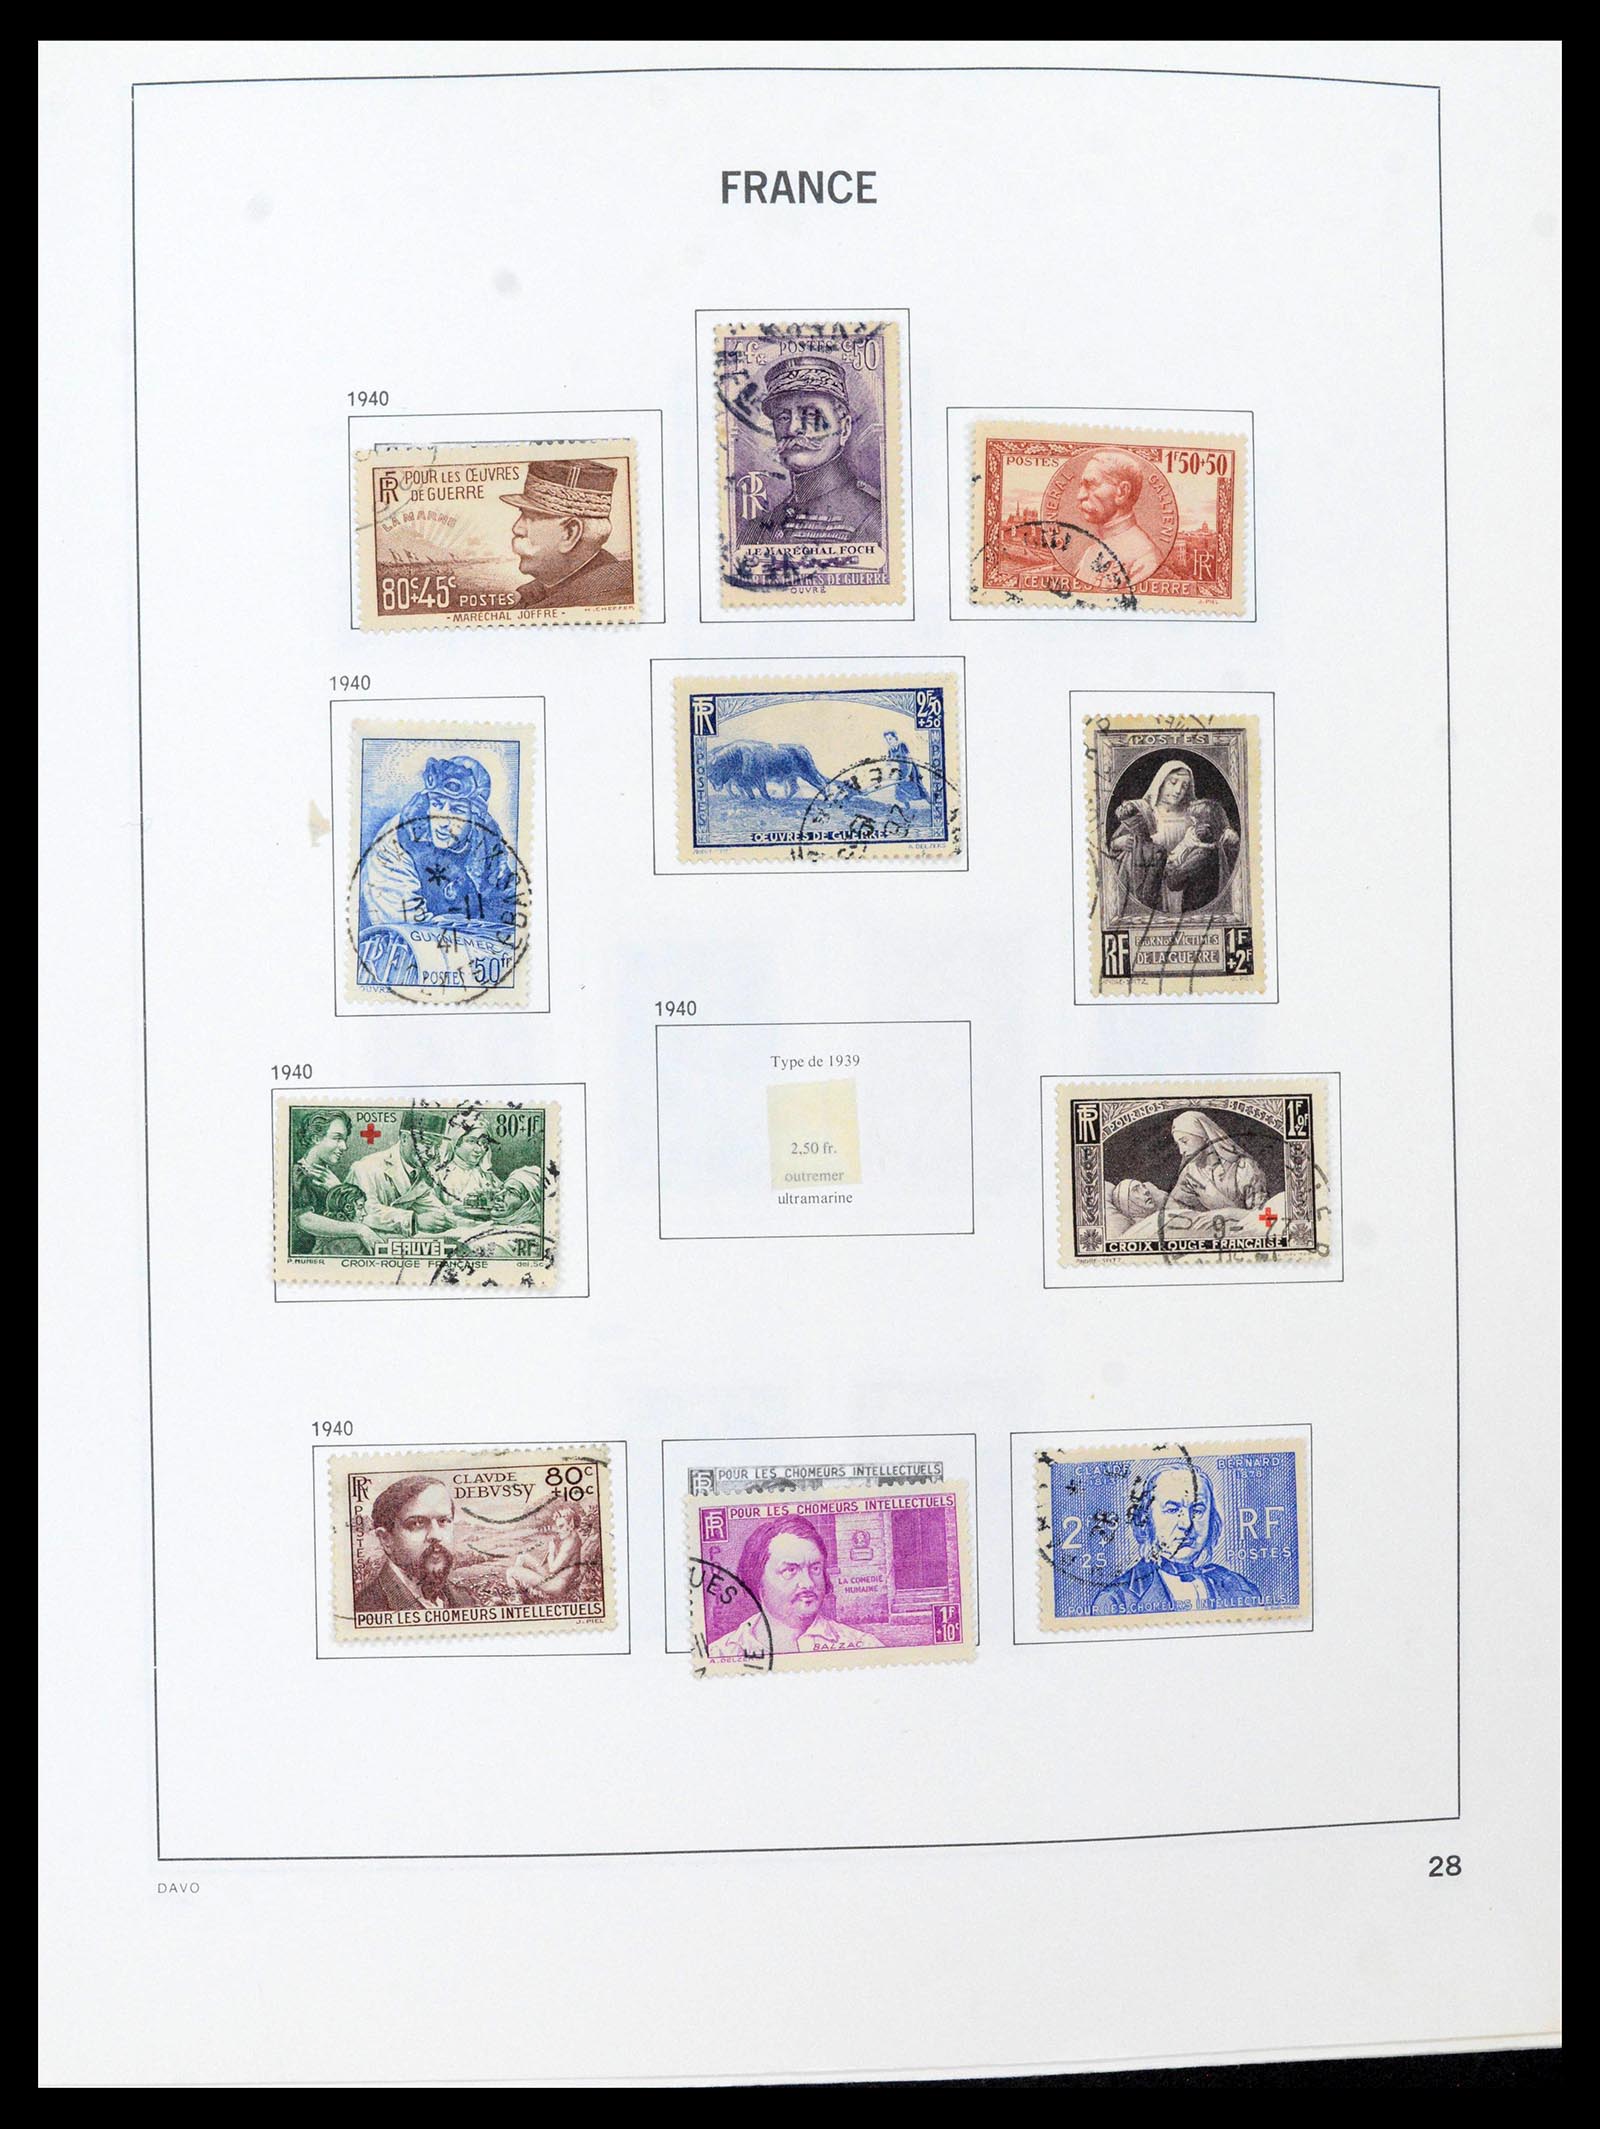 39164 0028 - Stamp collection 39164 France 1849-1981.